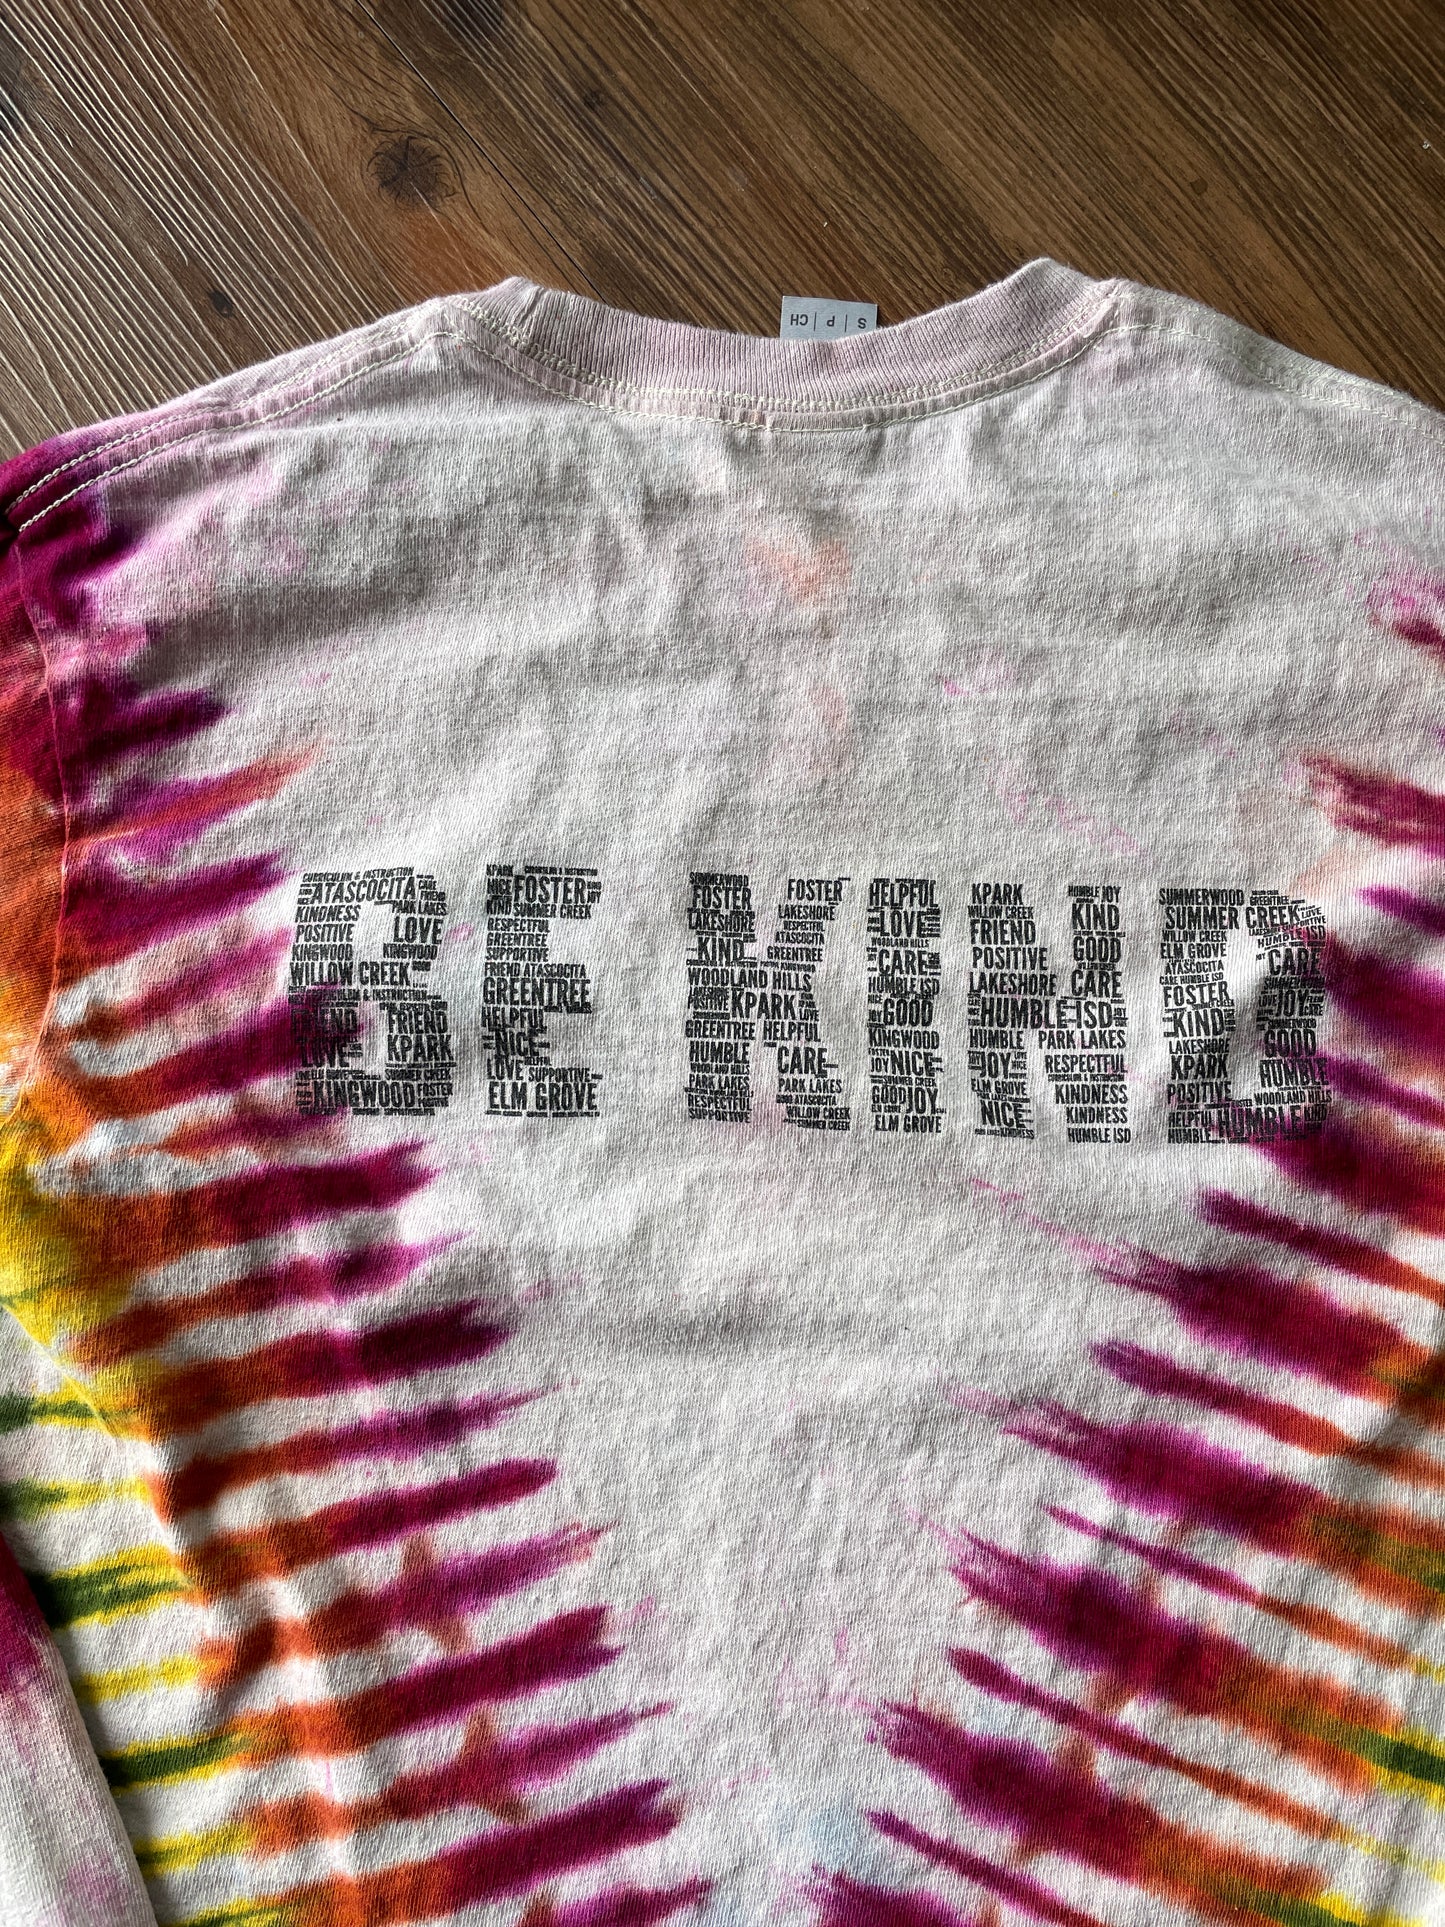 Small Men’s No Place for Hate Be Kind Handmade Tie Dye T-Shirt | Earthy Rainbow V-Pleated Tie Dye Long Sleeve